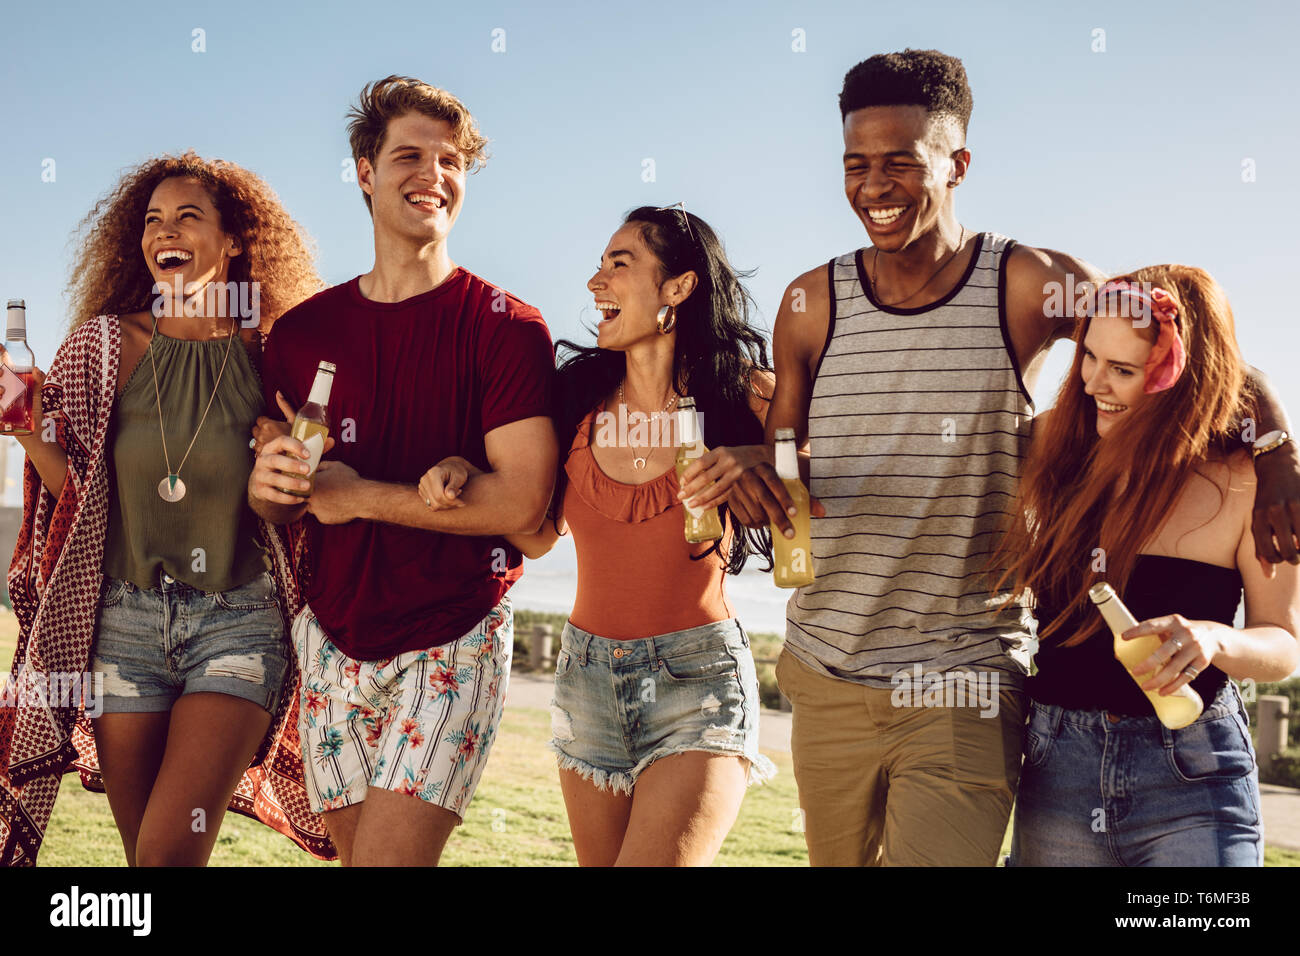 Group of friends walking together with locking arms. Young men and women with beers walking together and having fun. Stock Photo